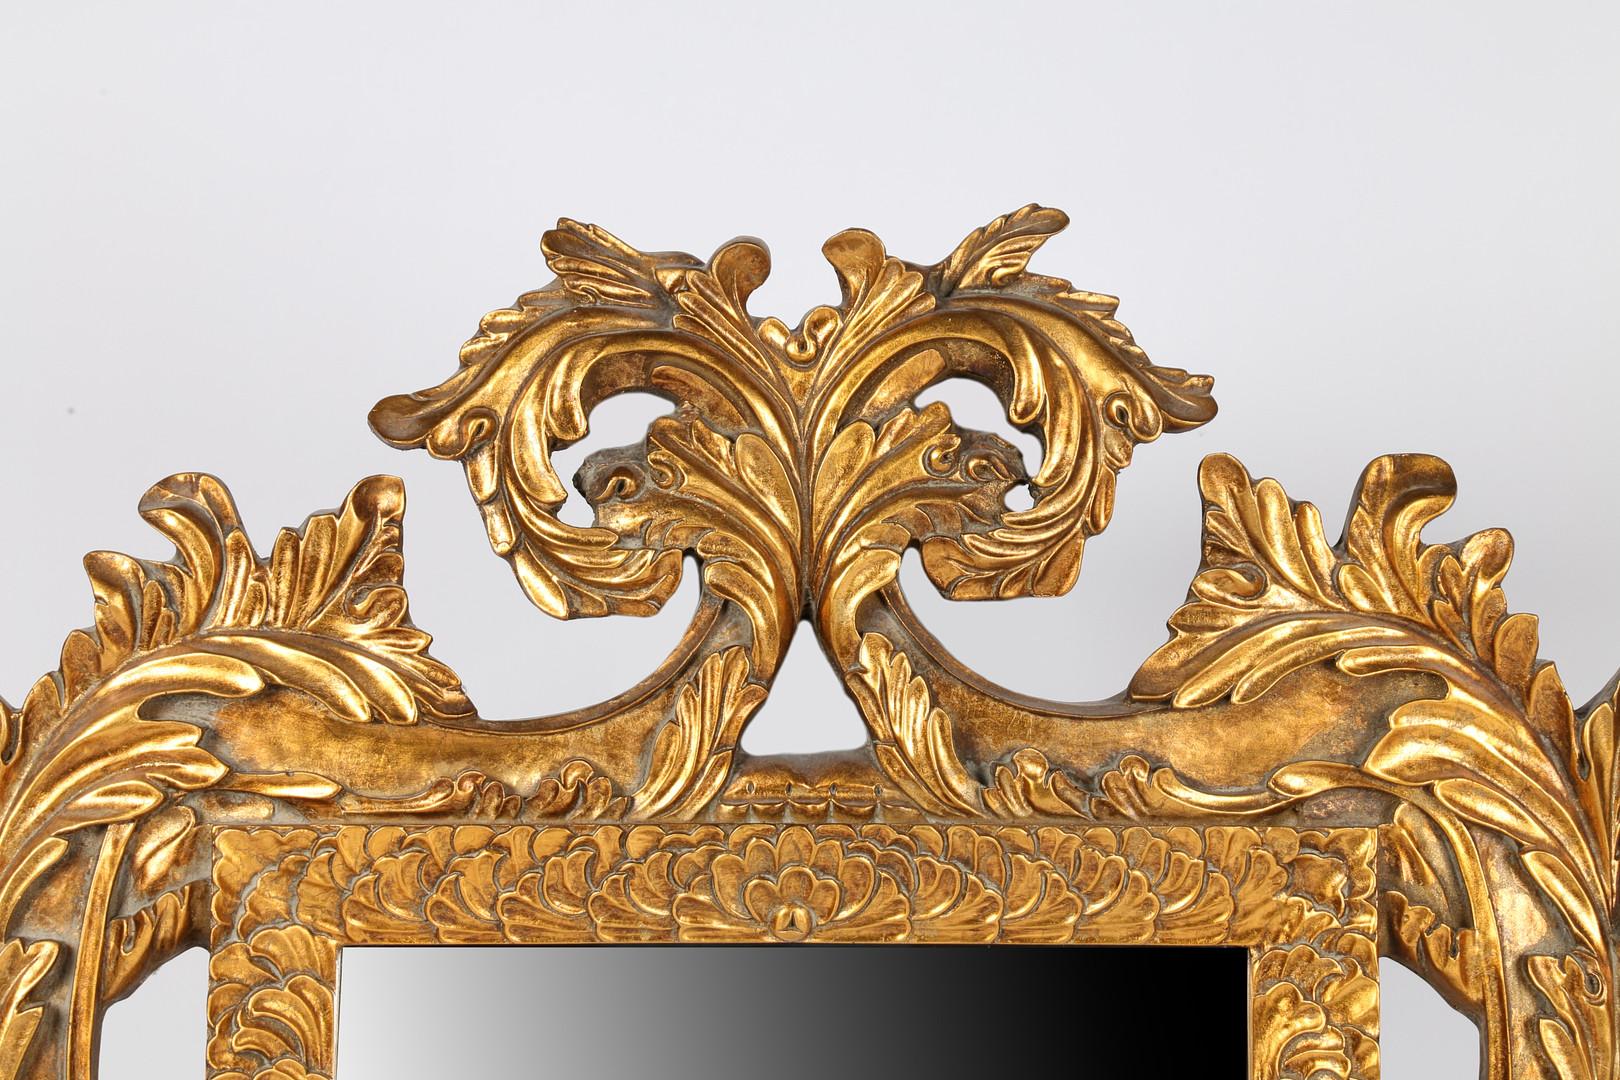 Woodwork Gilt Luxury Wall Mirror, Rare Large Antique Rococo English Floral Console Mirror For Sale